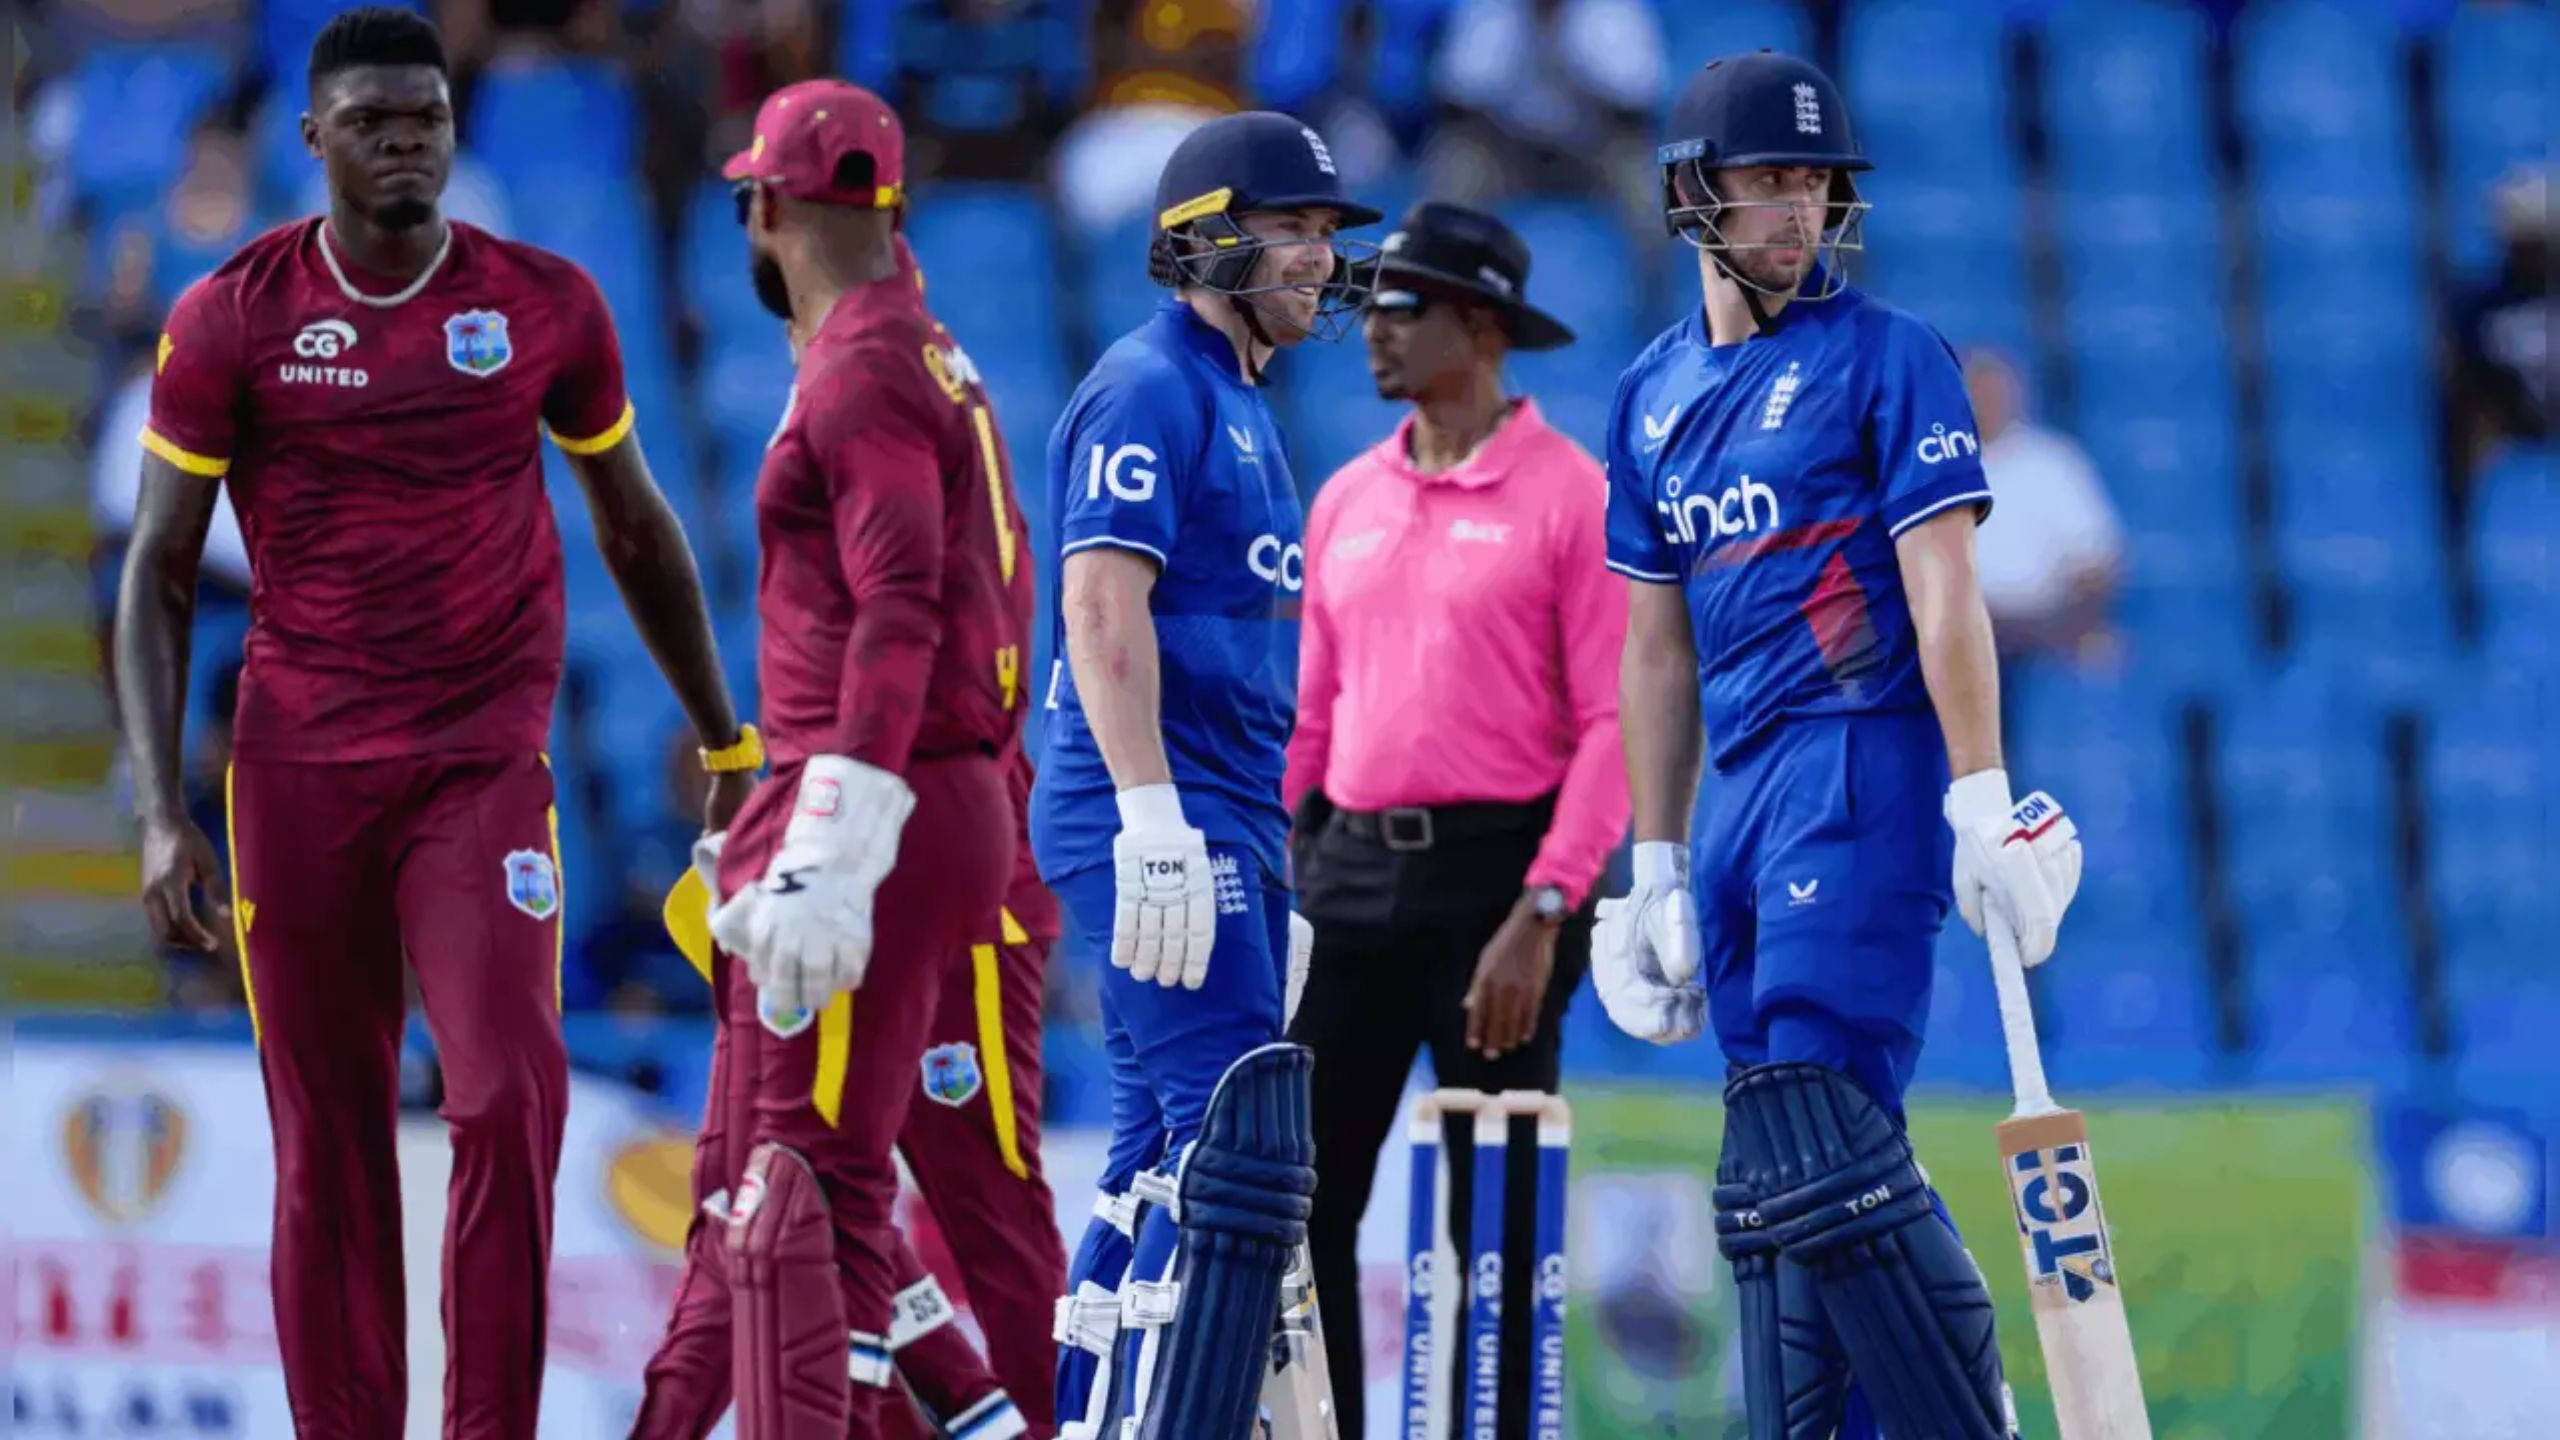 England vs West Indies in Ongoing T20 Series